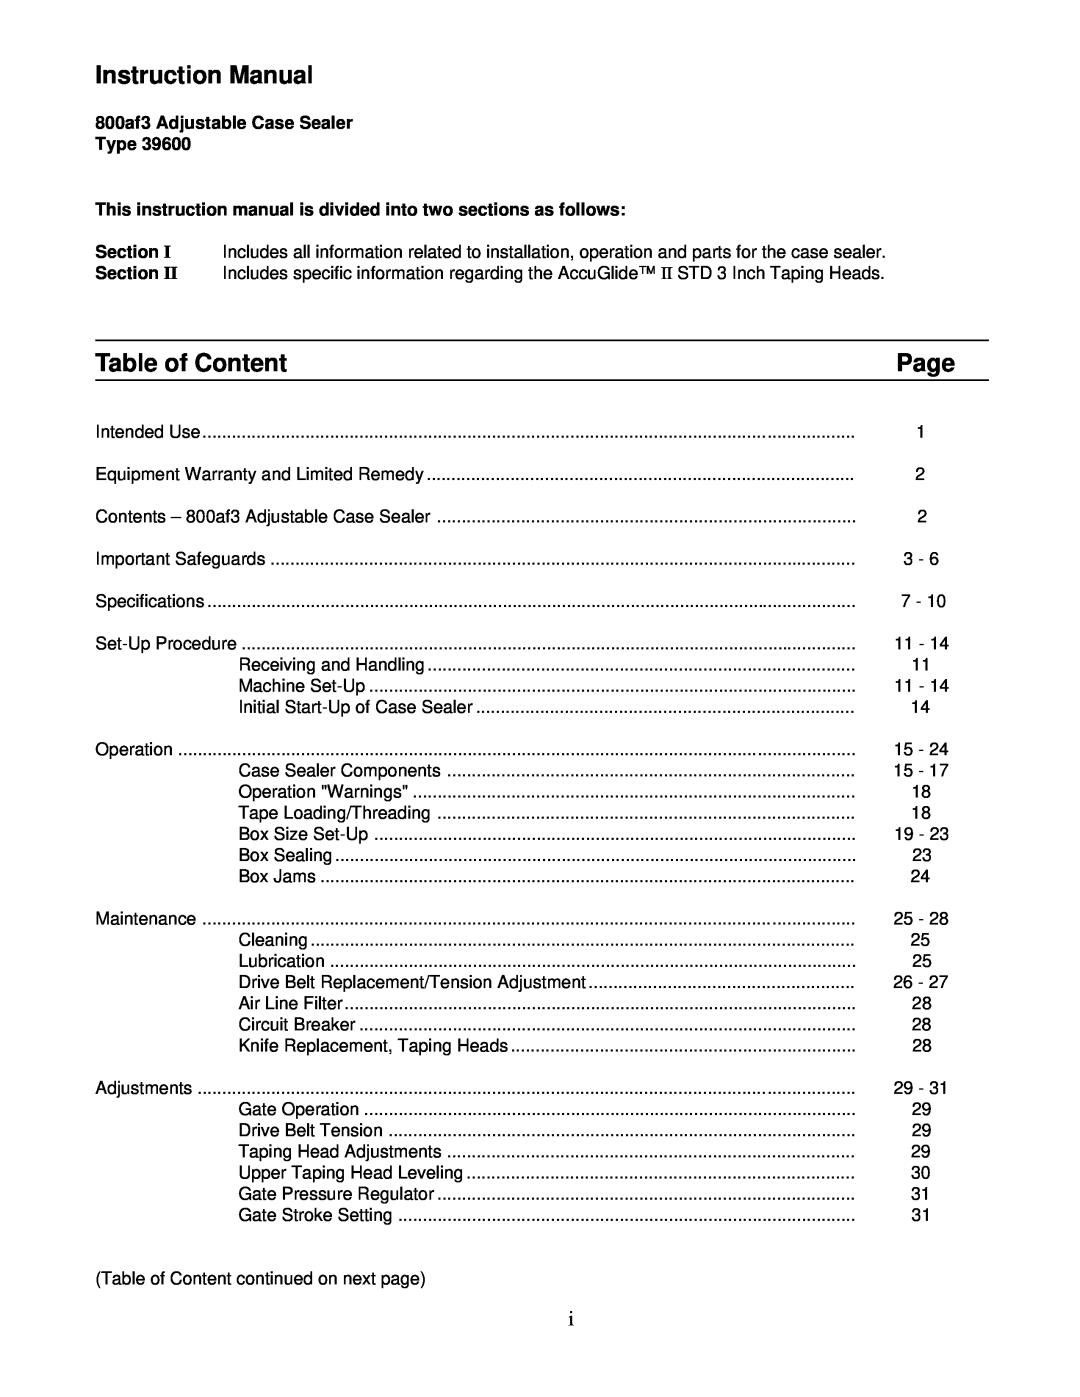 3M 39600 manual Instruction Manual, Table of Content, Page 